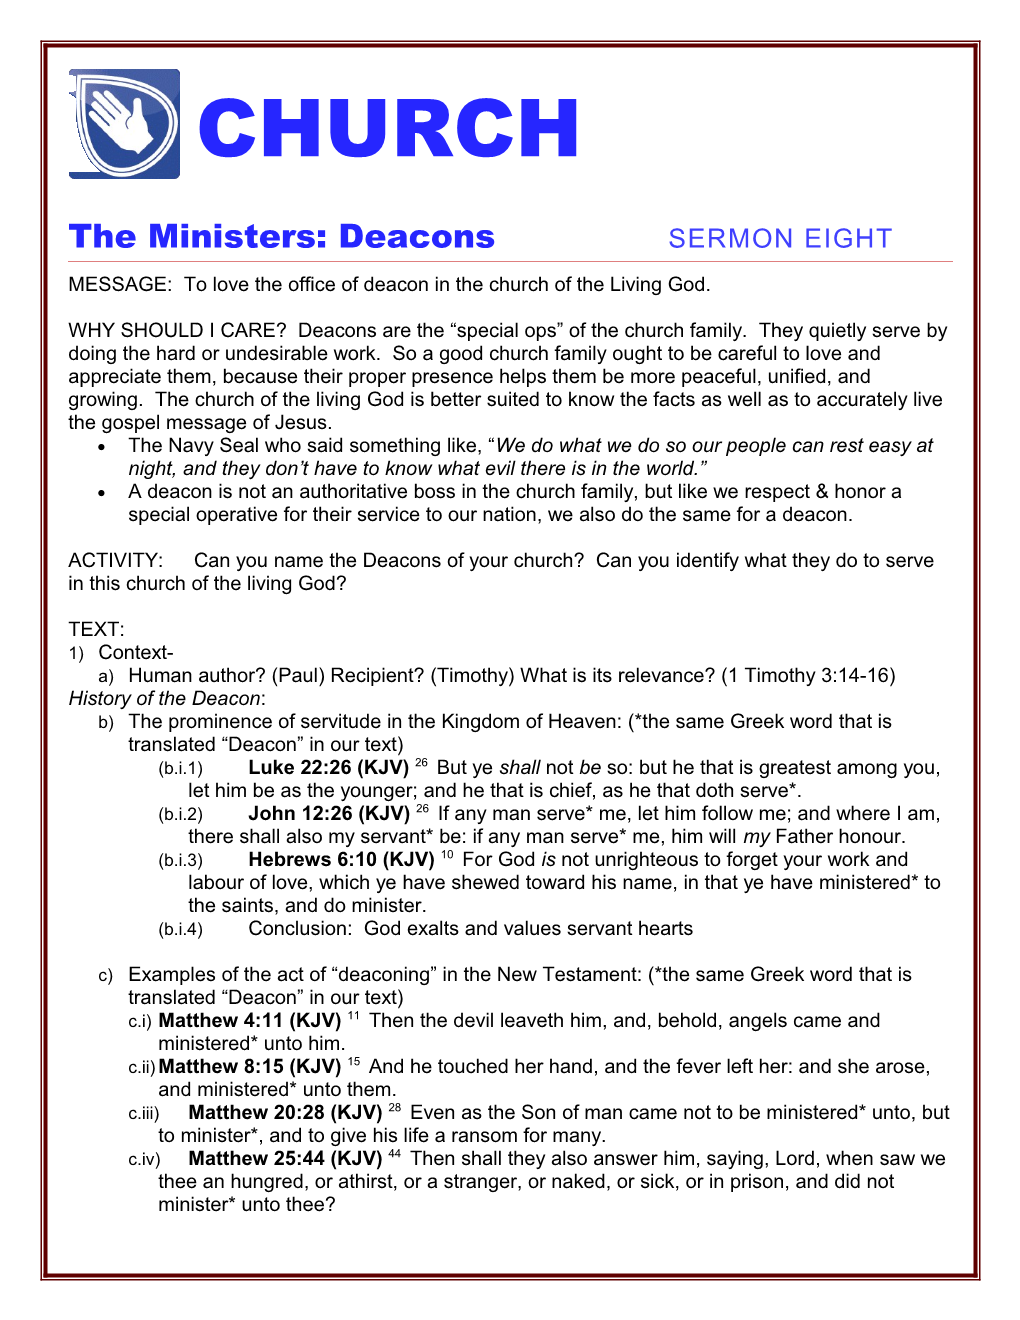 The Ministers: Deaconssermon Eight